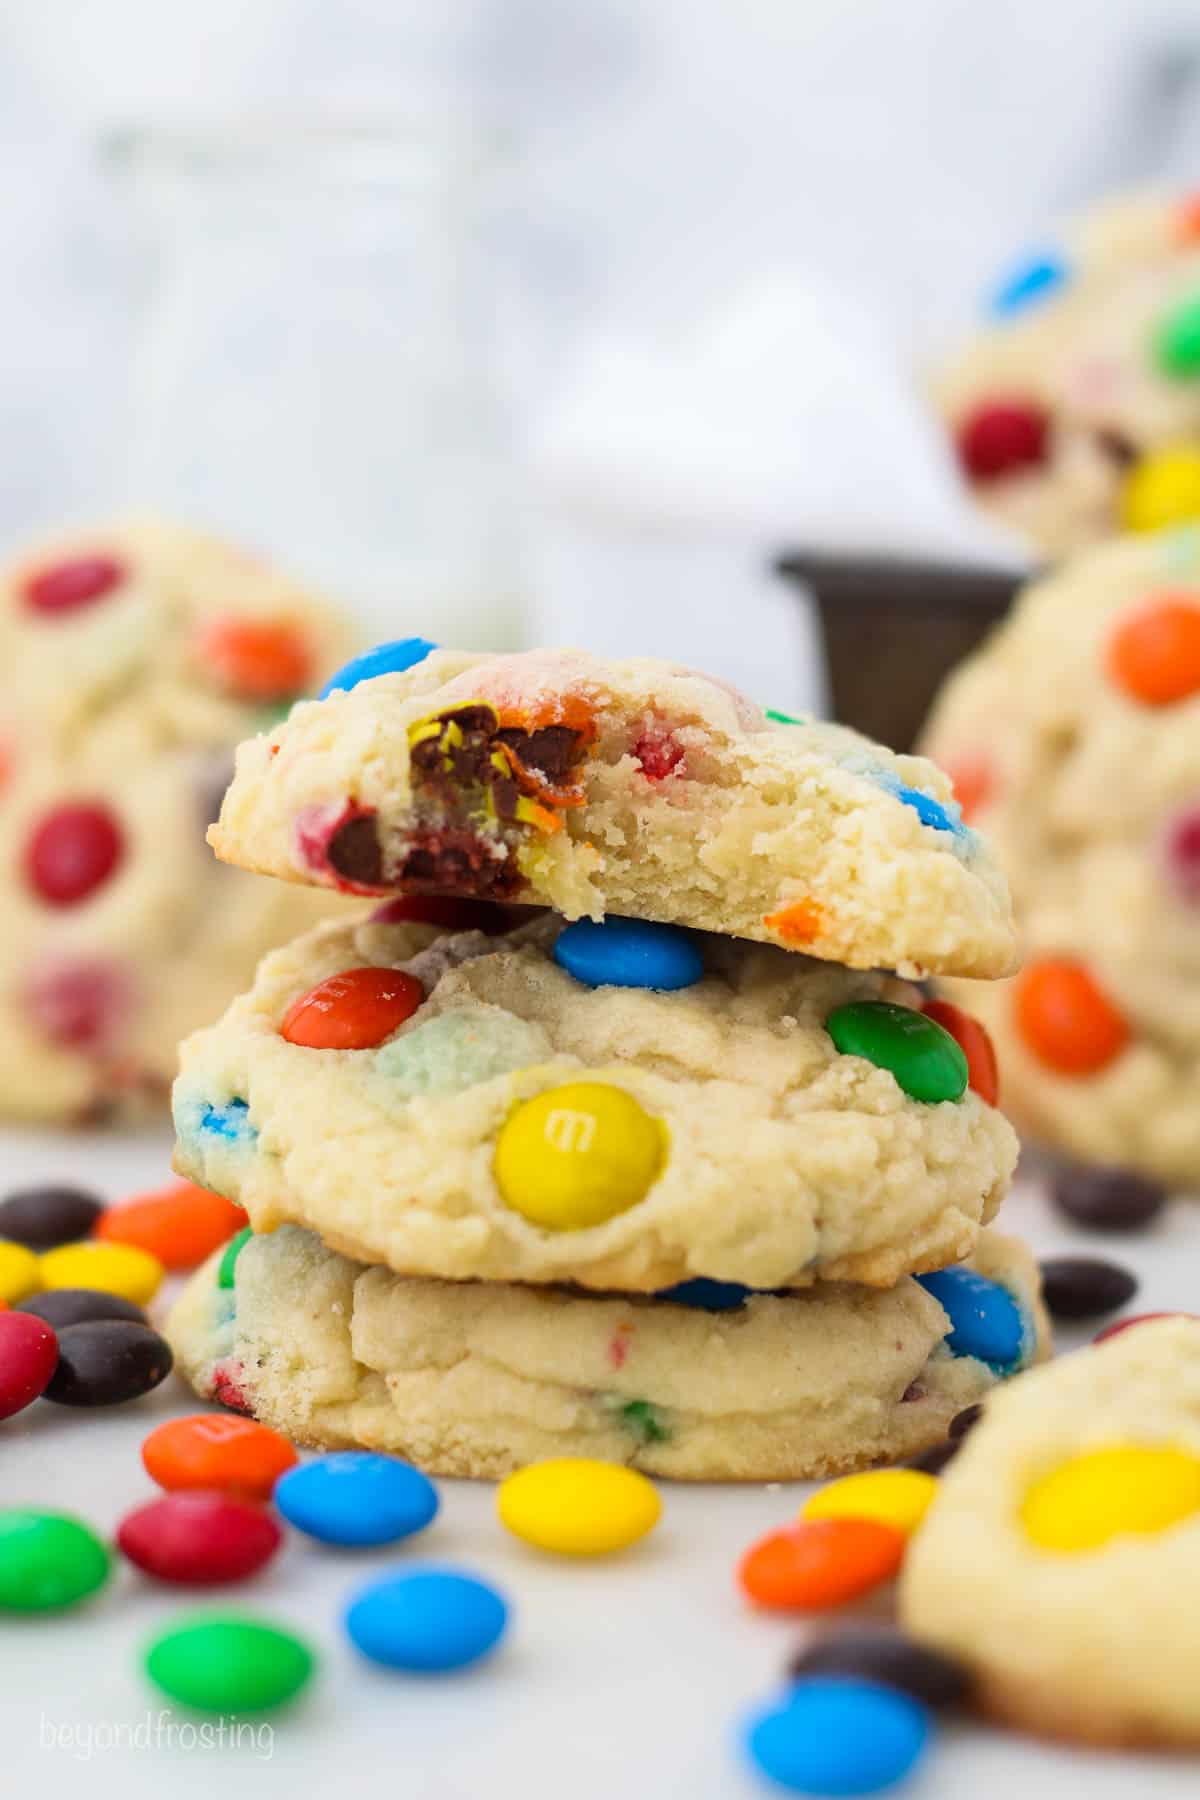 Side view of a stack of three M&M cookies with a bite missing from the top cookie, and more cookies in the background.